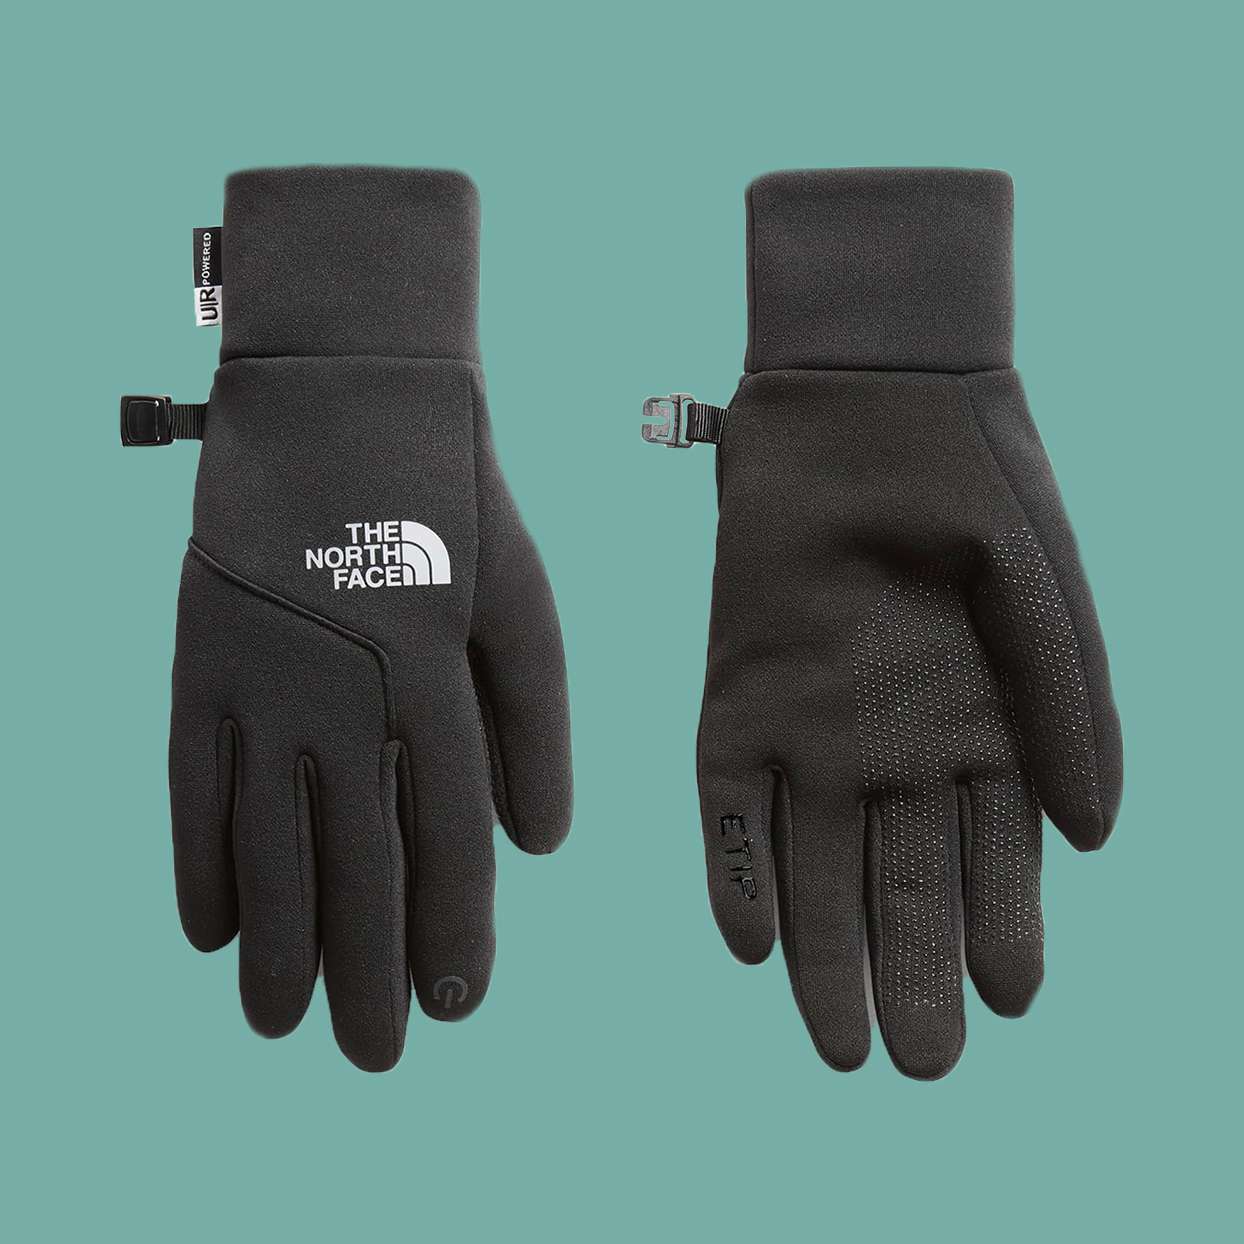 The North Face E-Tip Gloves Are Great 